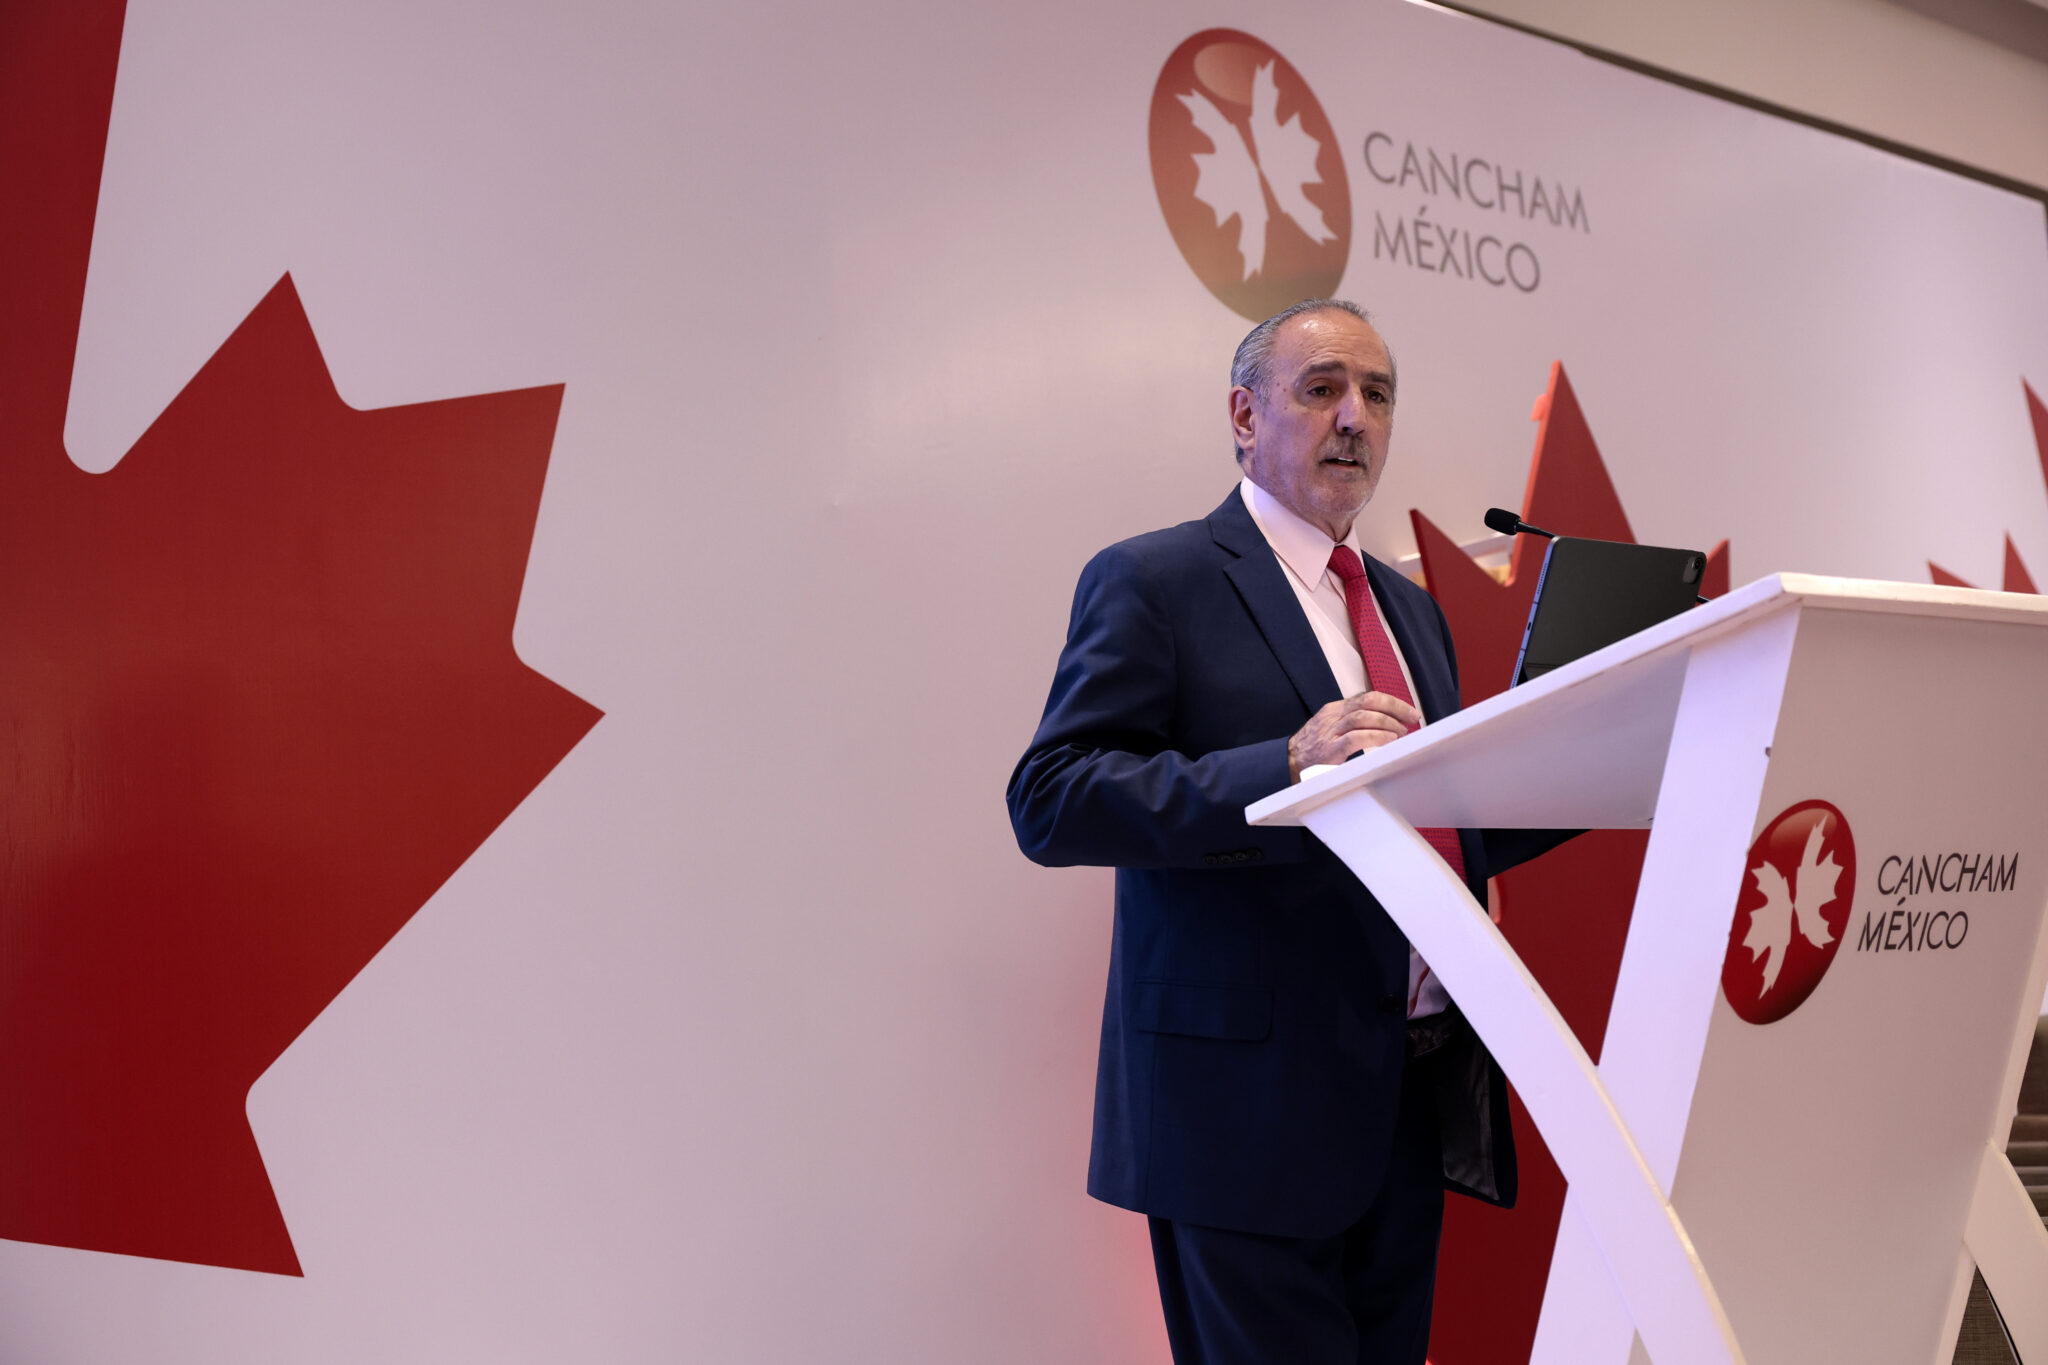 Cancham: Canada considers investments of up to $10 billion in Mexico